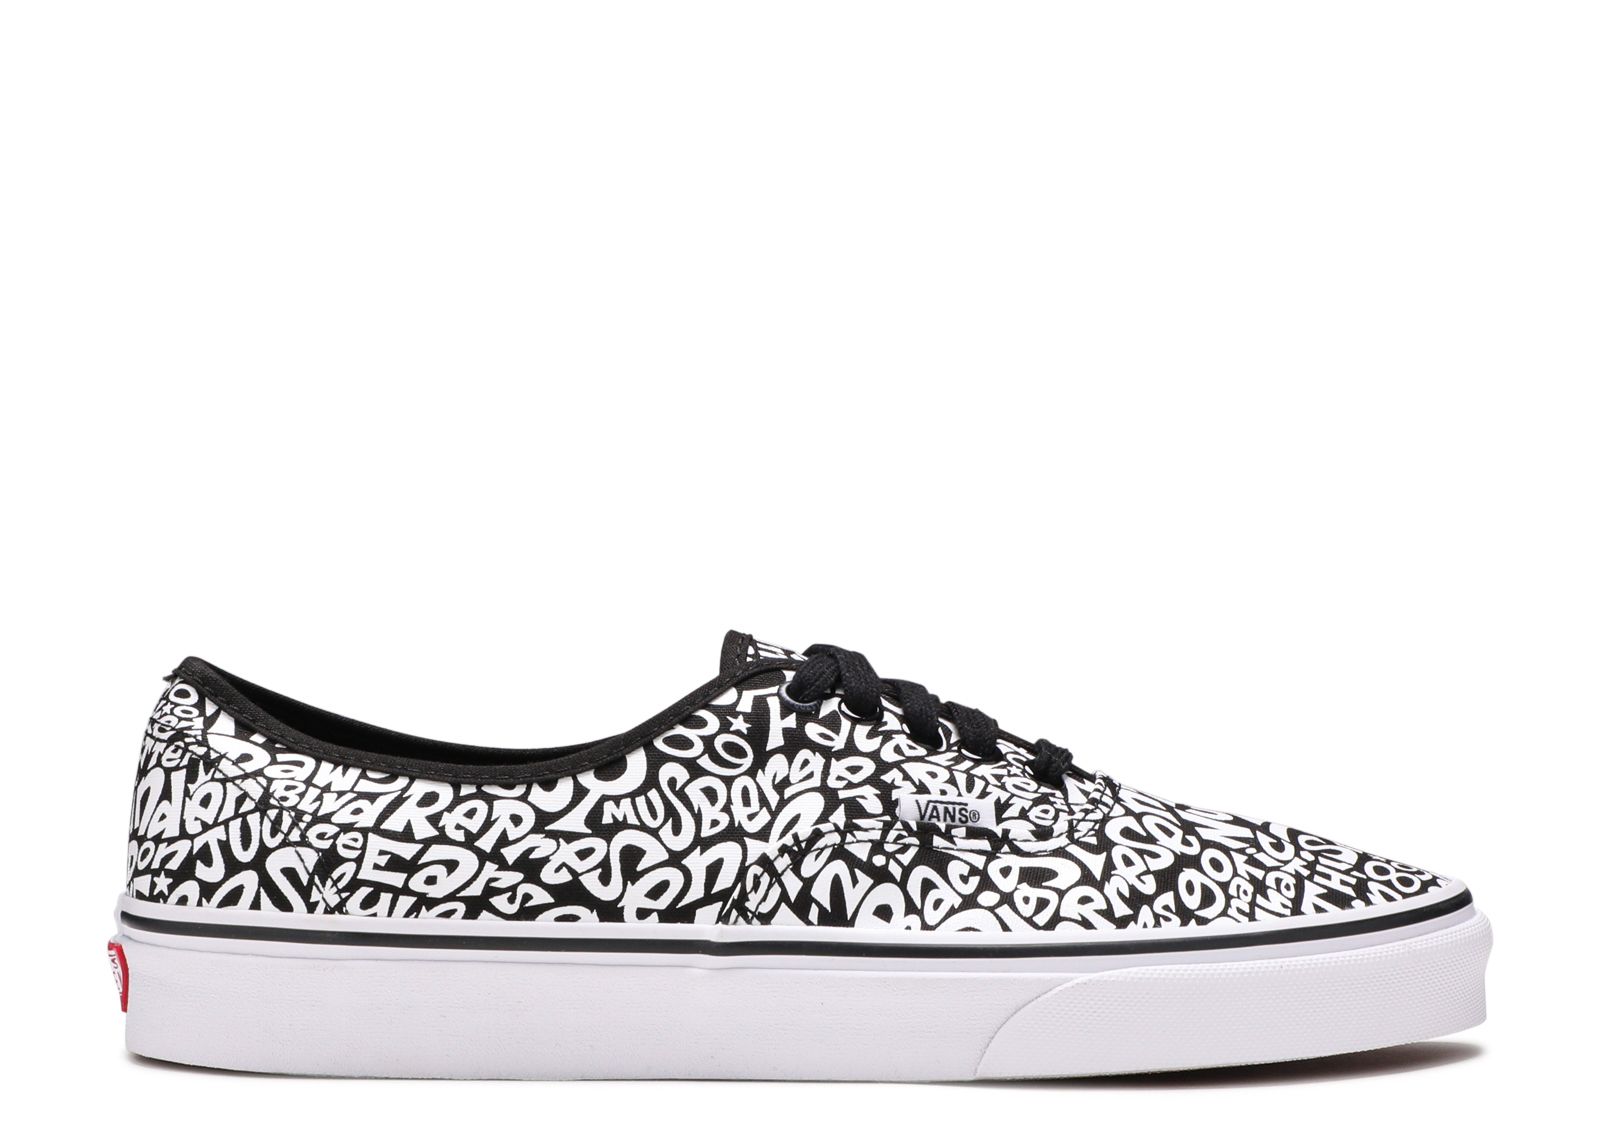 Кроссовки Vans A Tribe Called Quest X Authentic 'Tracklist', белый